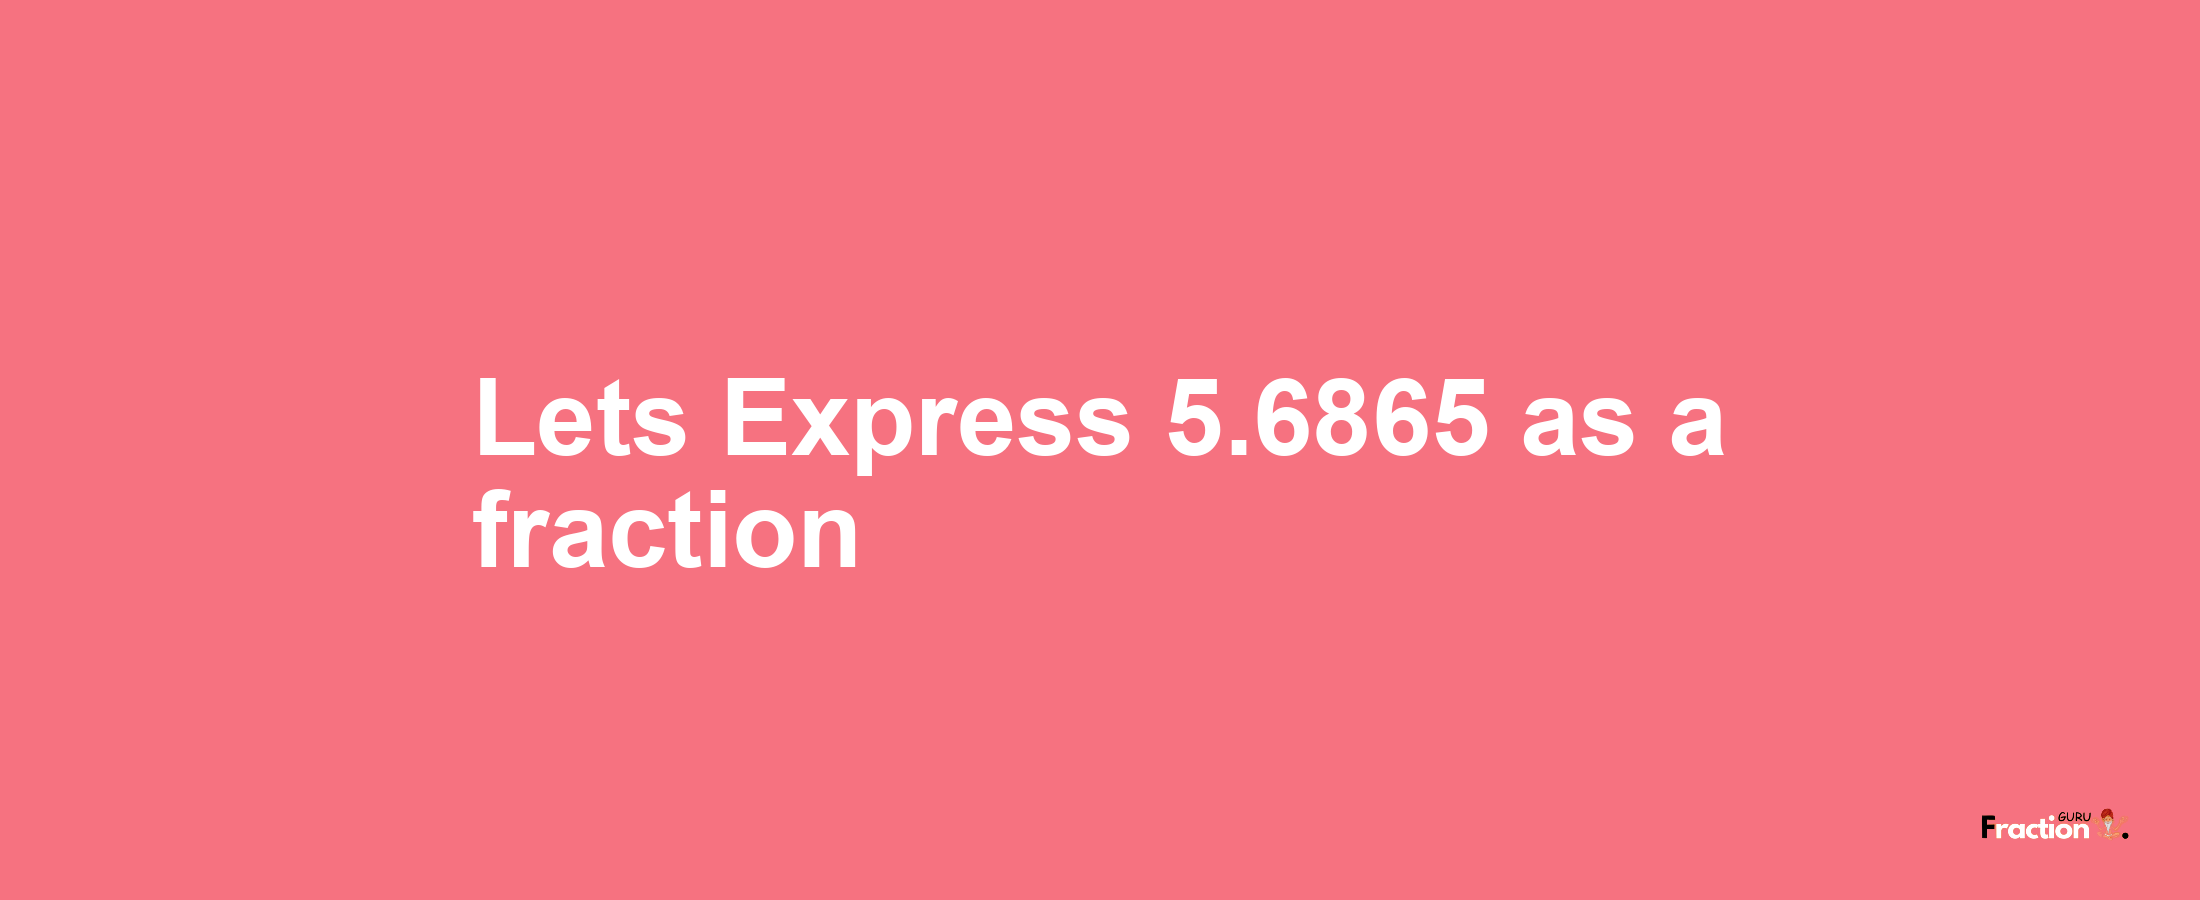 Lets Express 5.6865 as afraction